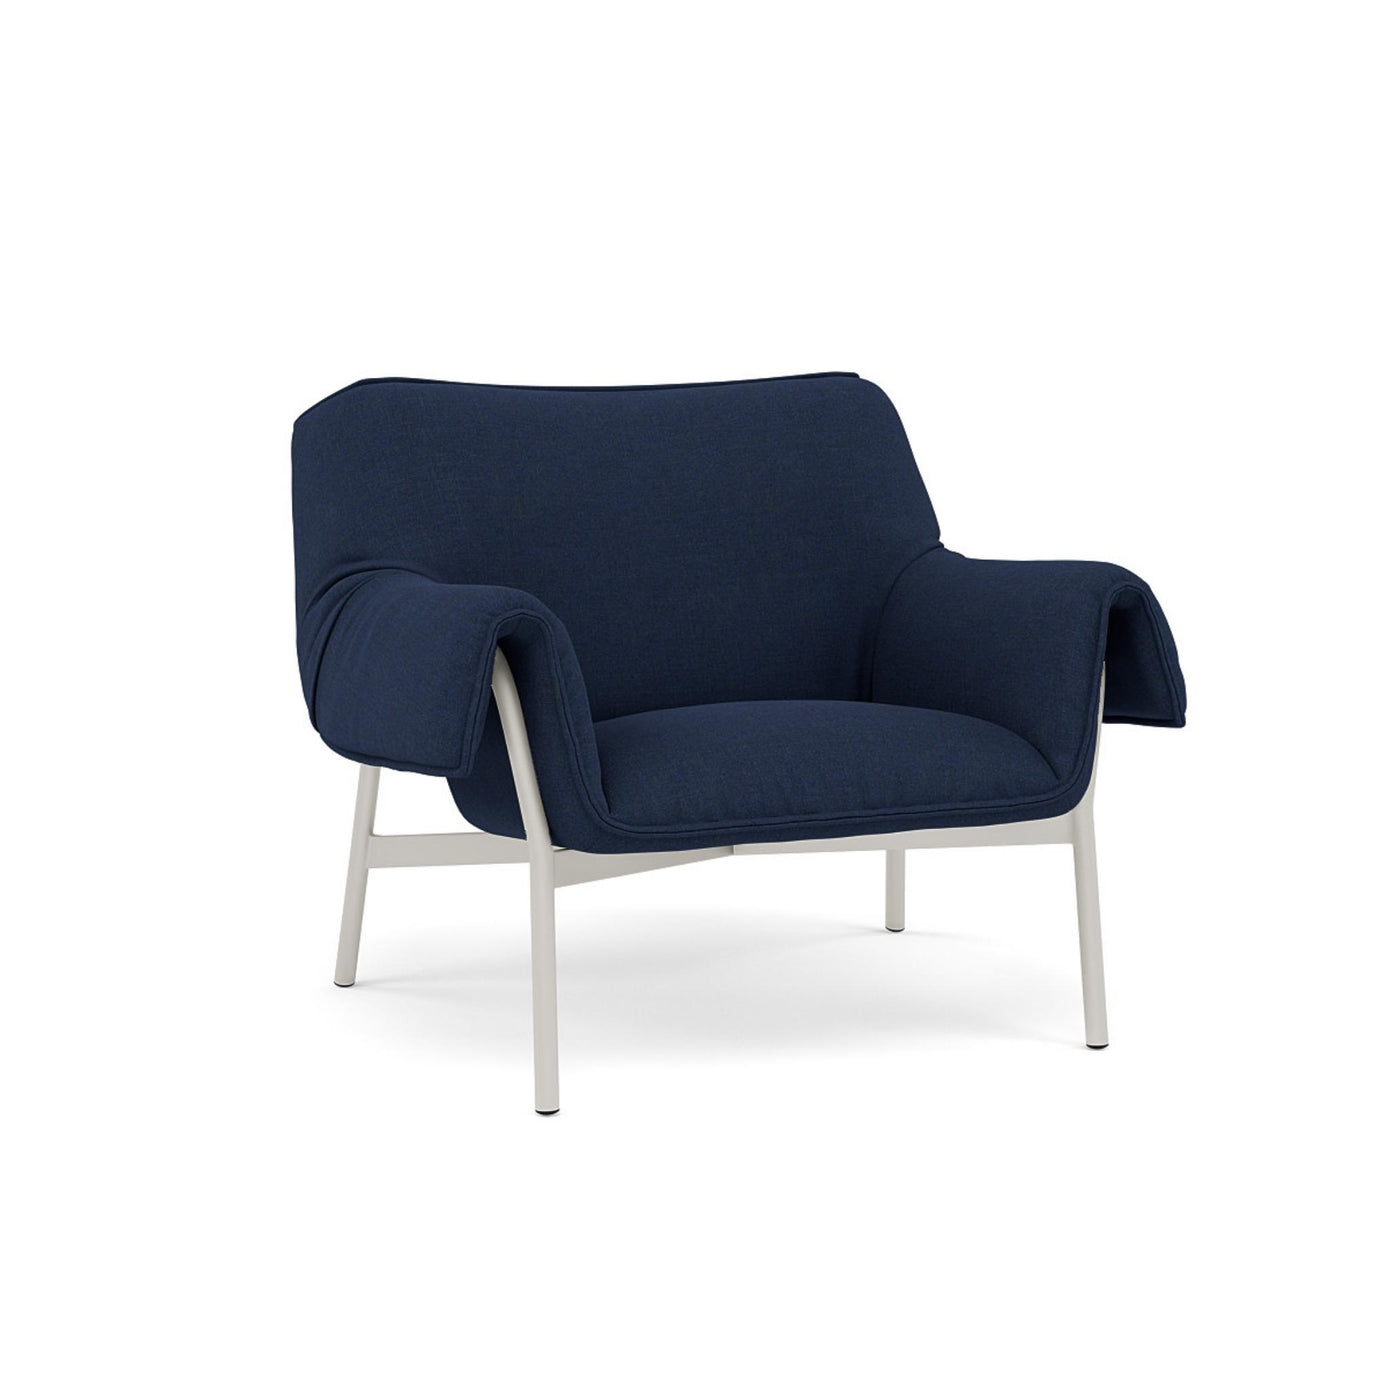 Muuto Wrap Lounge Chair. Made to order from someday designs. #colour_remix-773